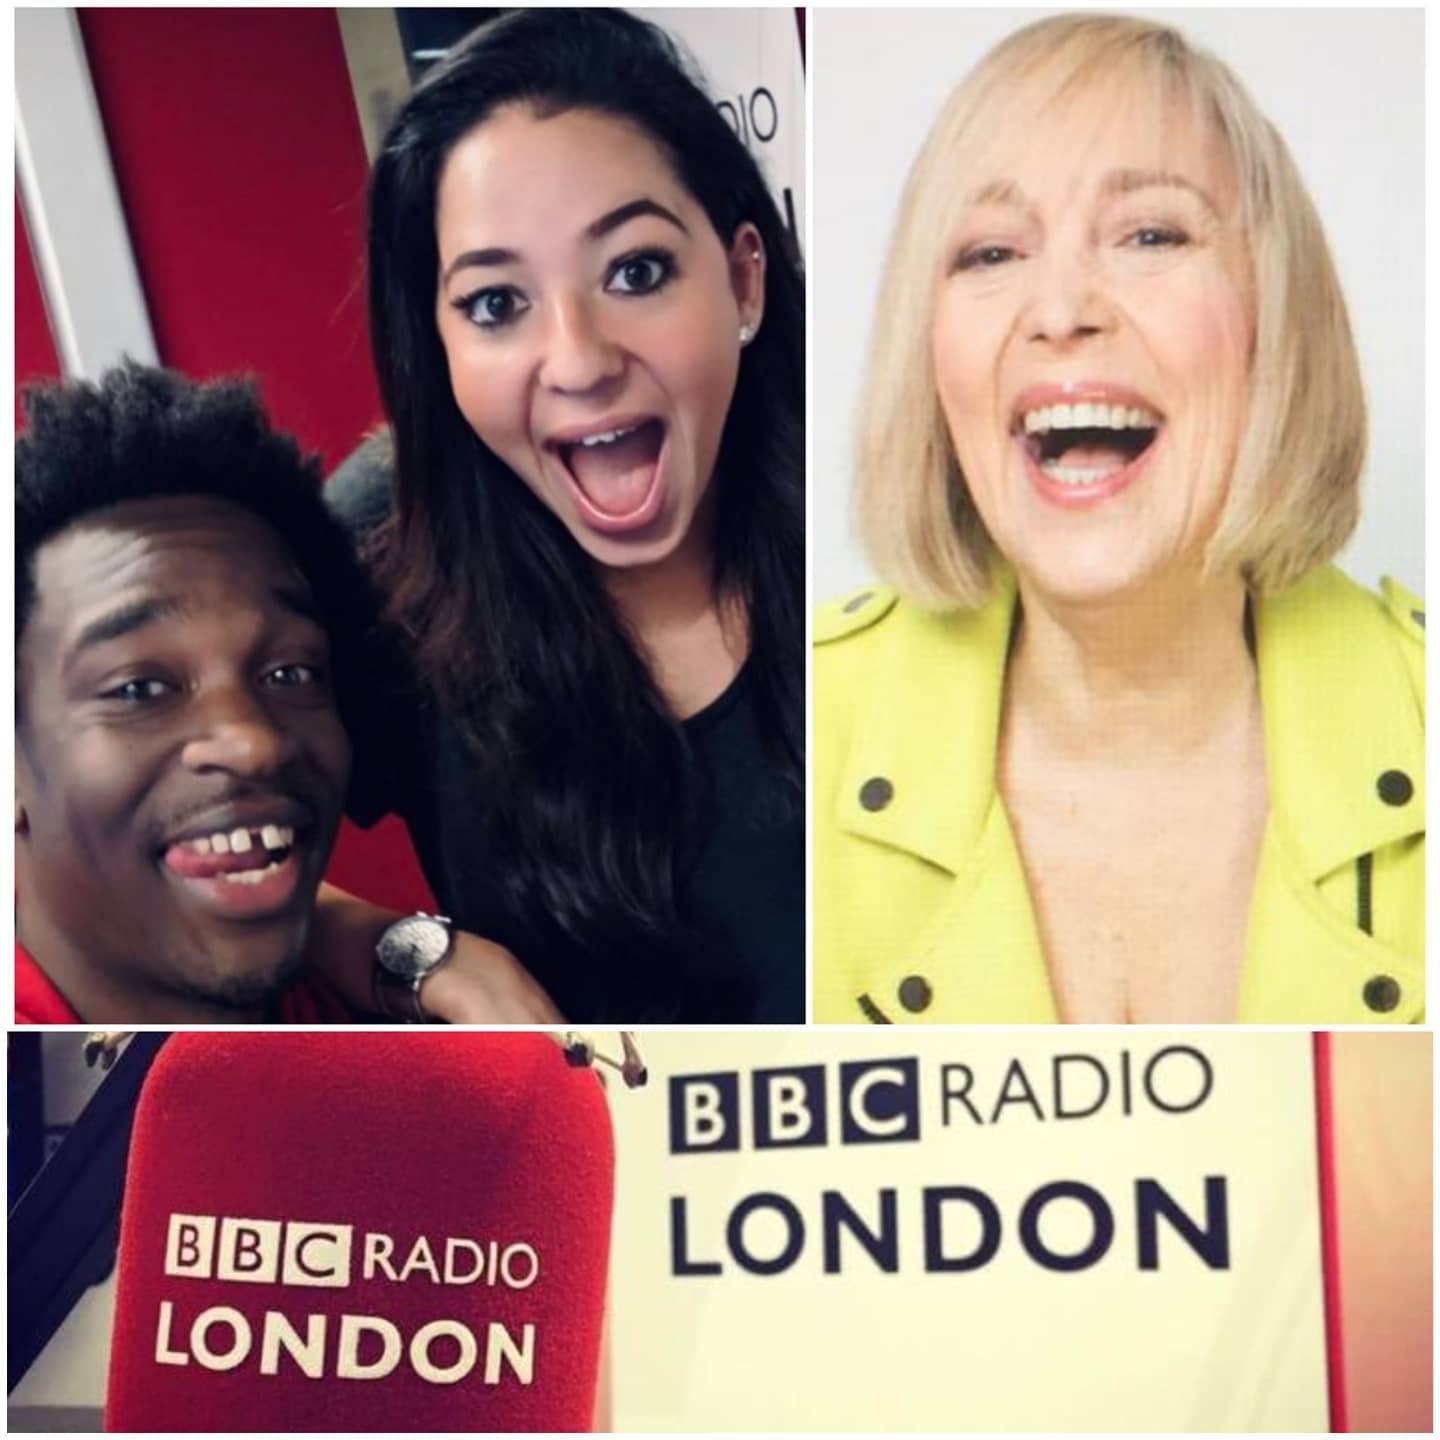 BBC Radio London with Salma and Lionheart.
22.30pm Thursday night.
.
Chatting about how the perceptions of the perfect body and young women's positive body image has been dramatically and adversely affected with the advent of social media, especially over the last 10 years. . 
.
Back in the day - in the 1970s, the decade in which my novel "Secrets in the Dark" is set - young women would have scrutinised their bodyshapes in the mirror, wishing they could have been slimmer, taller or even bigger breasted - looking more like their favourite model or pop star - and addressed their issues with a dramatic diet or some slimming pills. 

They never had the pressure of negative online peer judgement and the skewed perceptions of online reality versus real life,  causing comparison anxiety, unrealistic ideals of perfection and mental health issues. 



@bbcradiolondon
@palamedespr



@salmaandlionheart